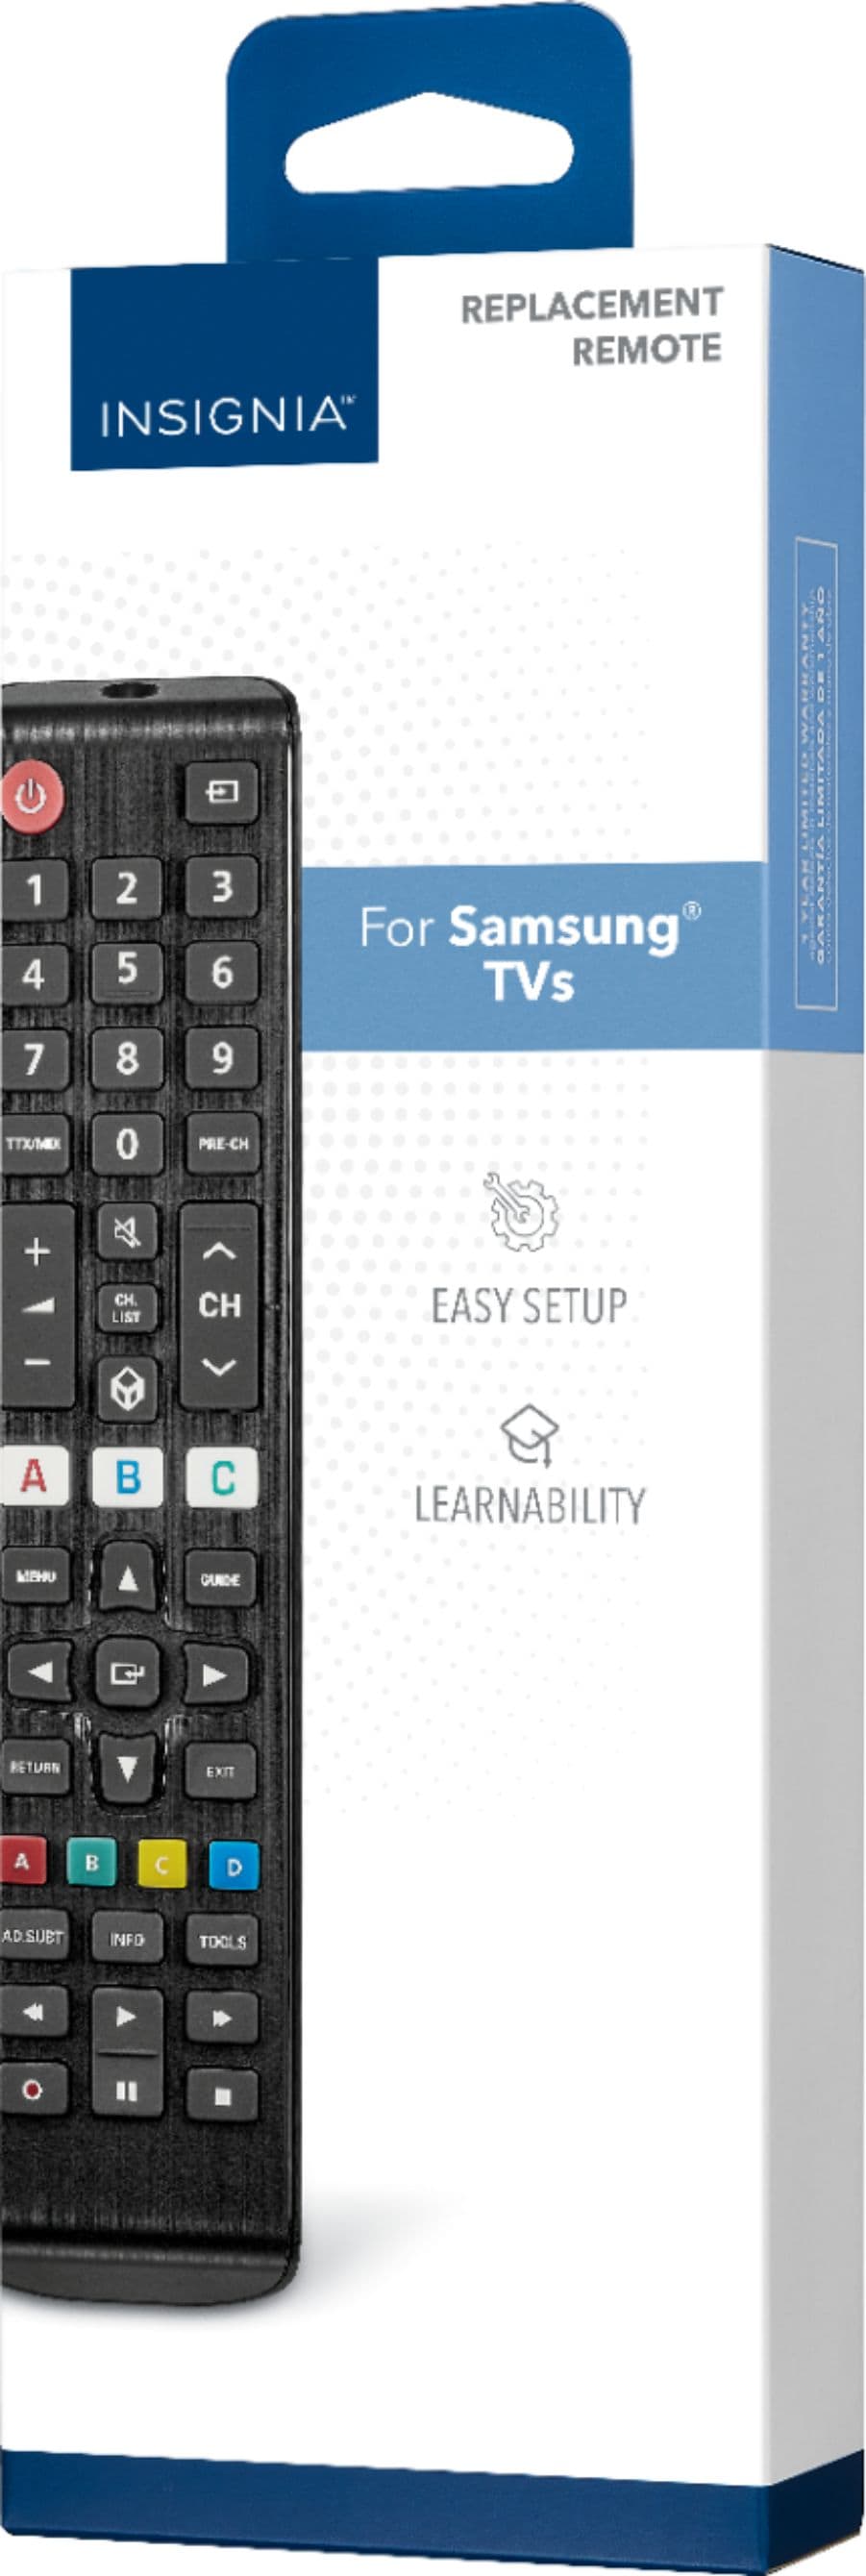 Insignia™ - Replacement Remote for Samsung TVs - Black_1